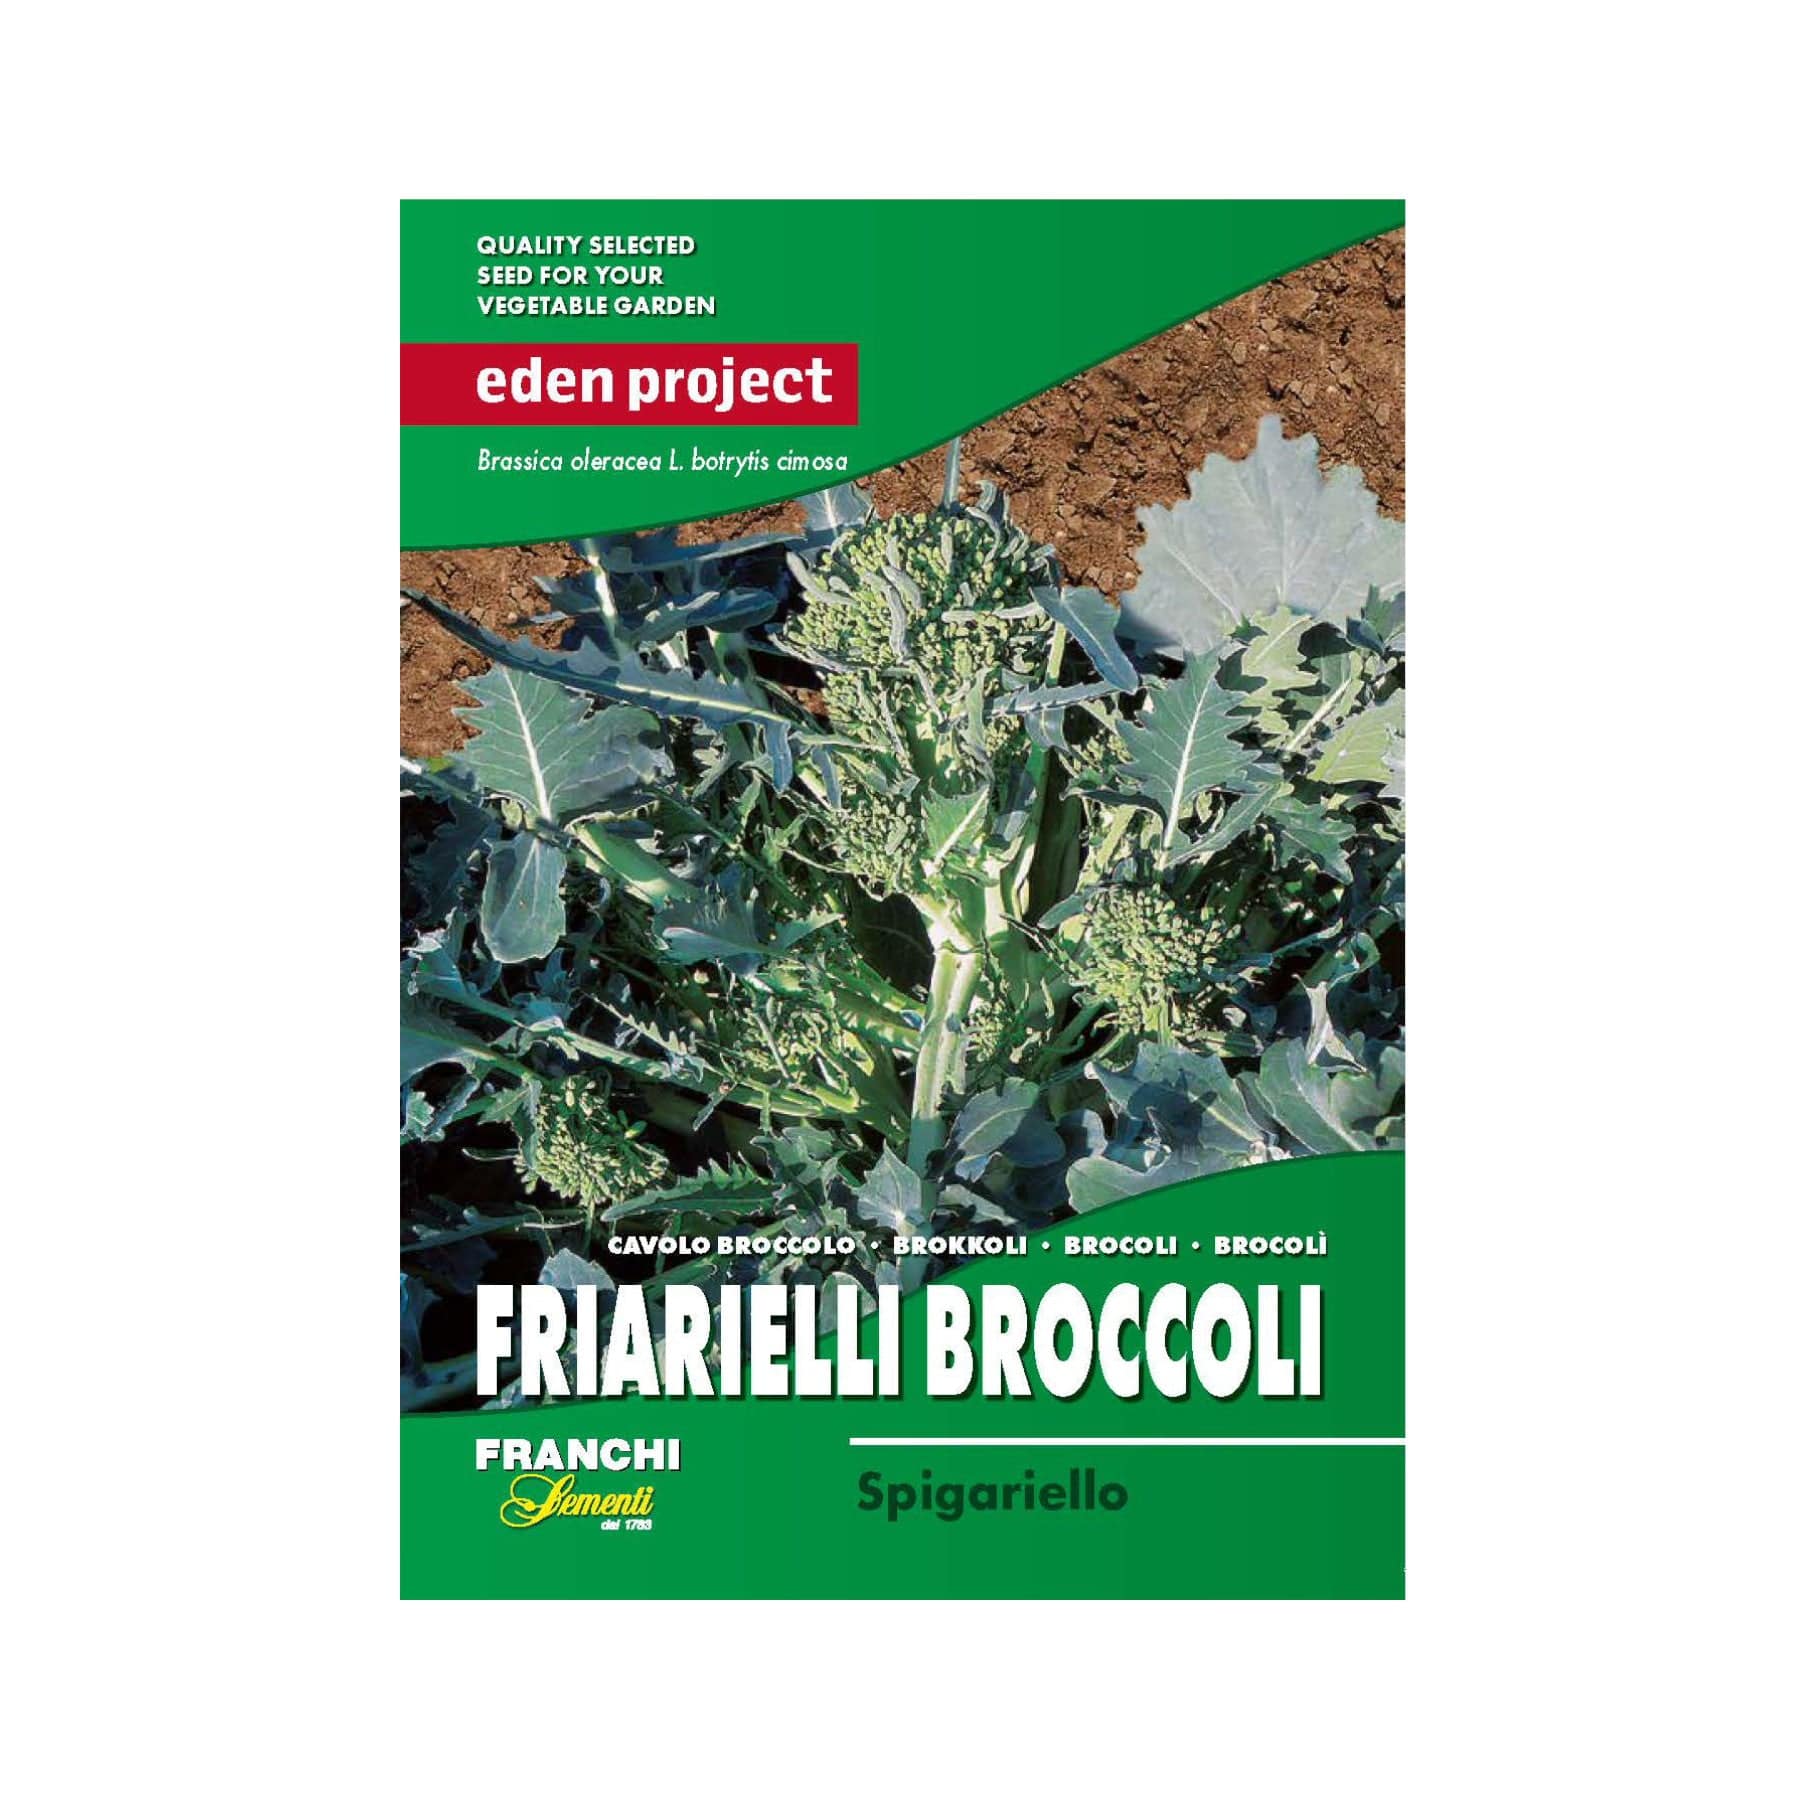 Eden Project Friarielli Broccoli seed packet by Franchi Sementi, quality selected seeds for vegetable garden, Brassica oleracea botrytis cymosa, Cavolo Broccolo, on soil background.